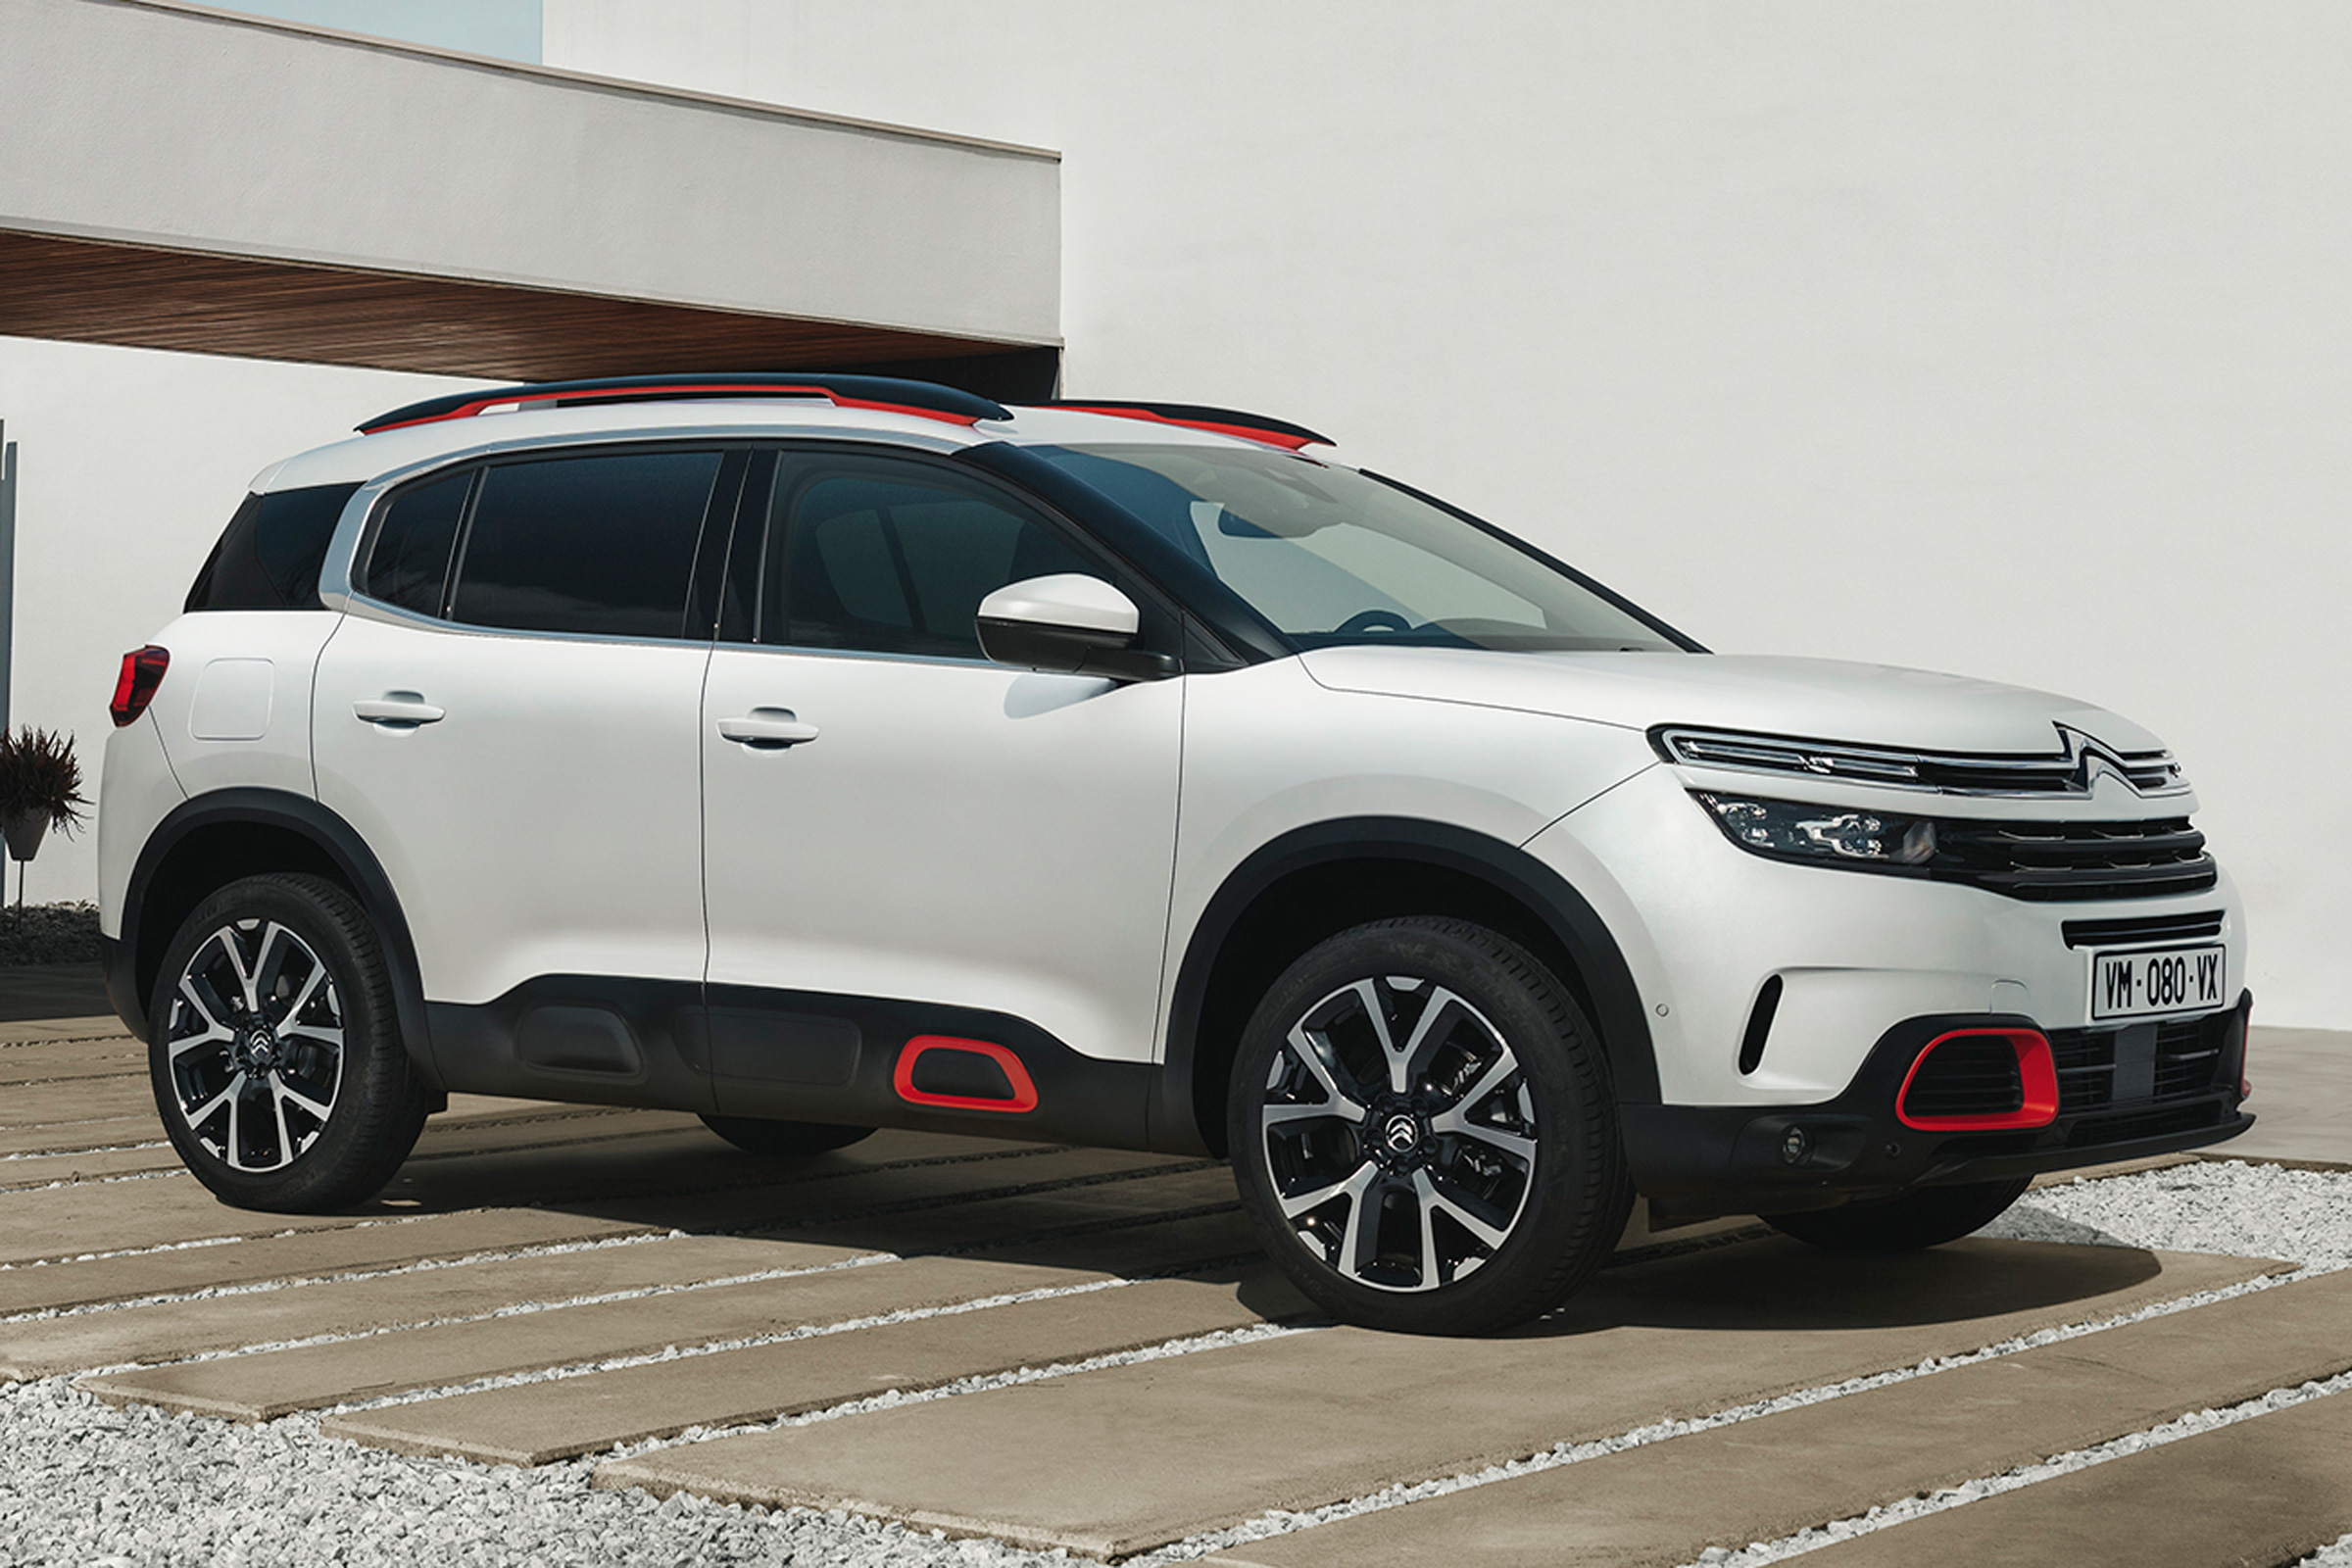 Citroen C5 Aircross Suv 19 Prices Specification And Release Date Carbuyer